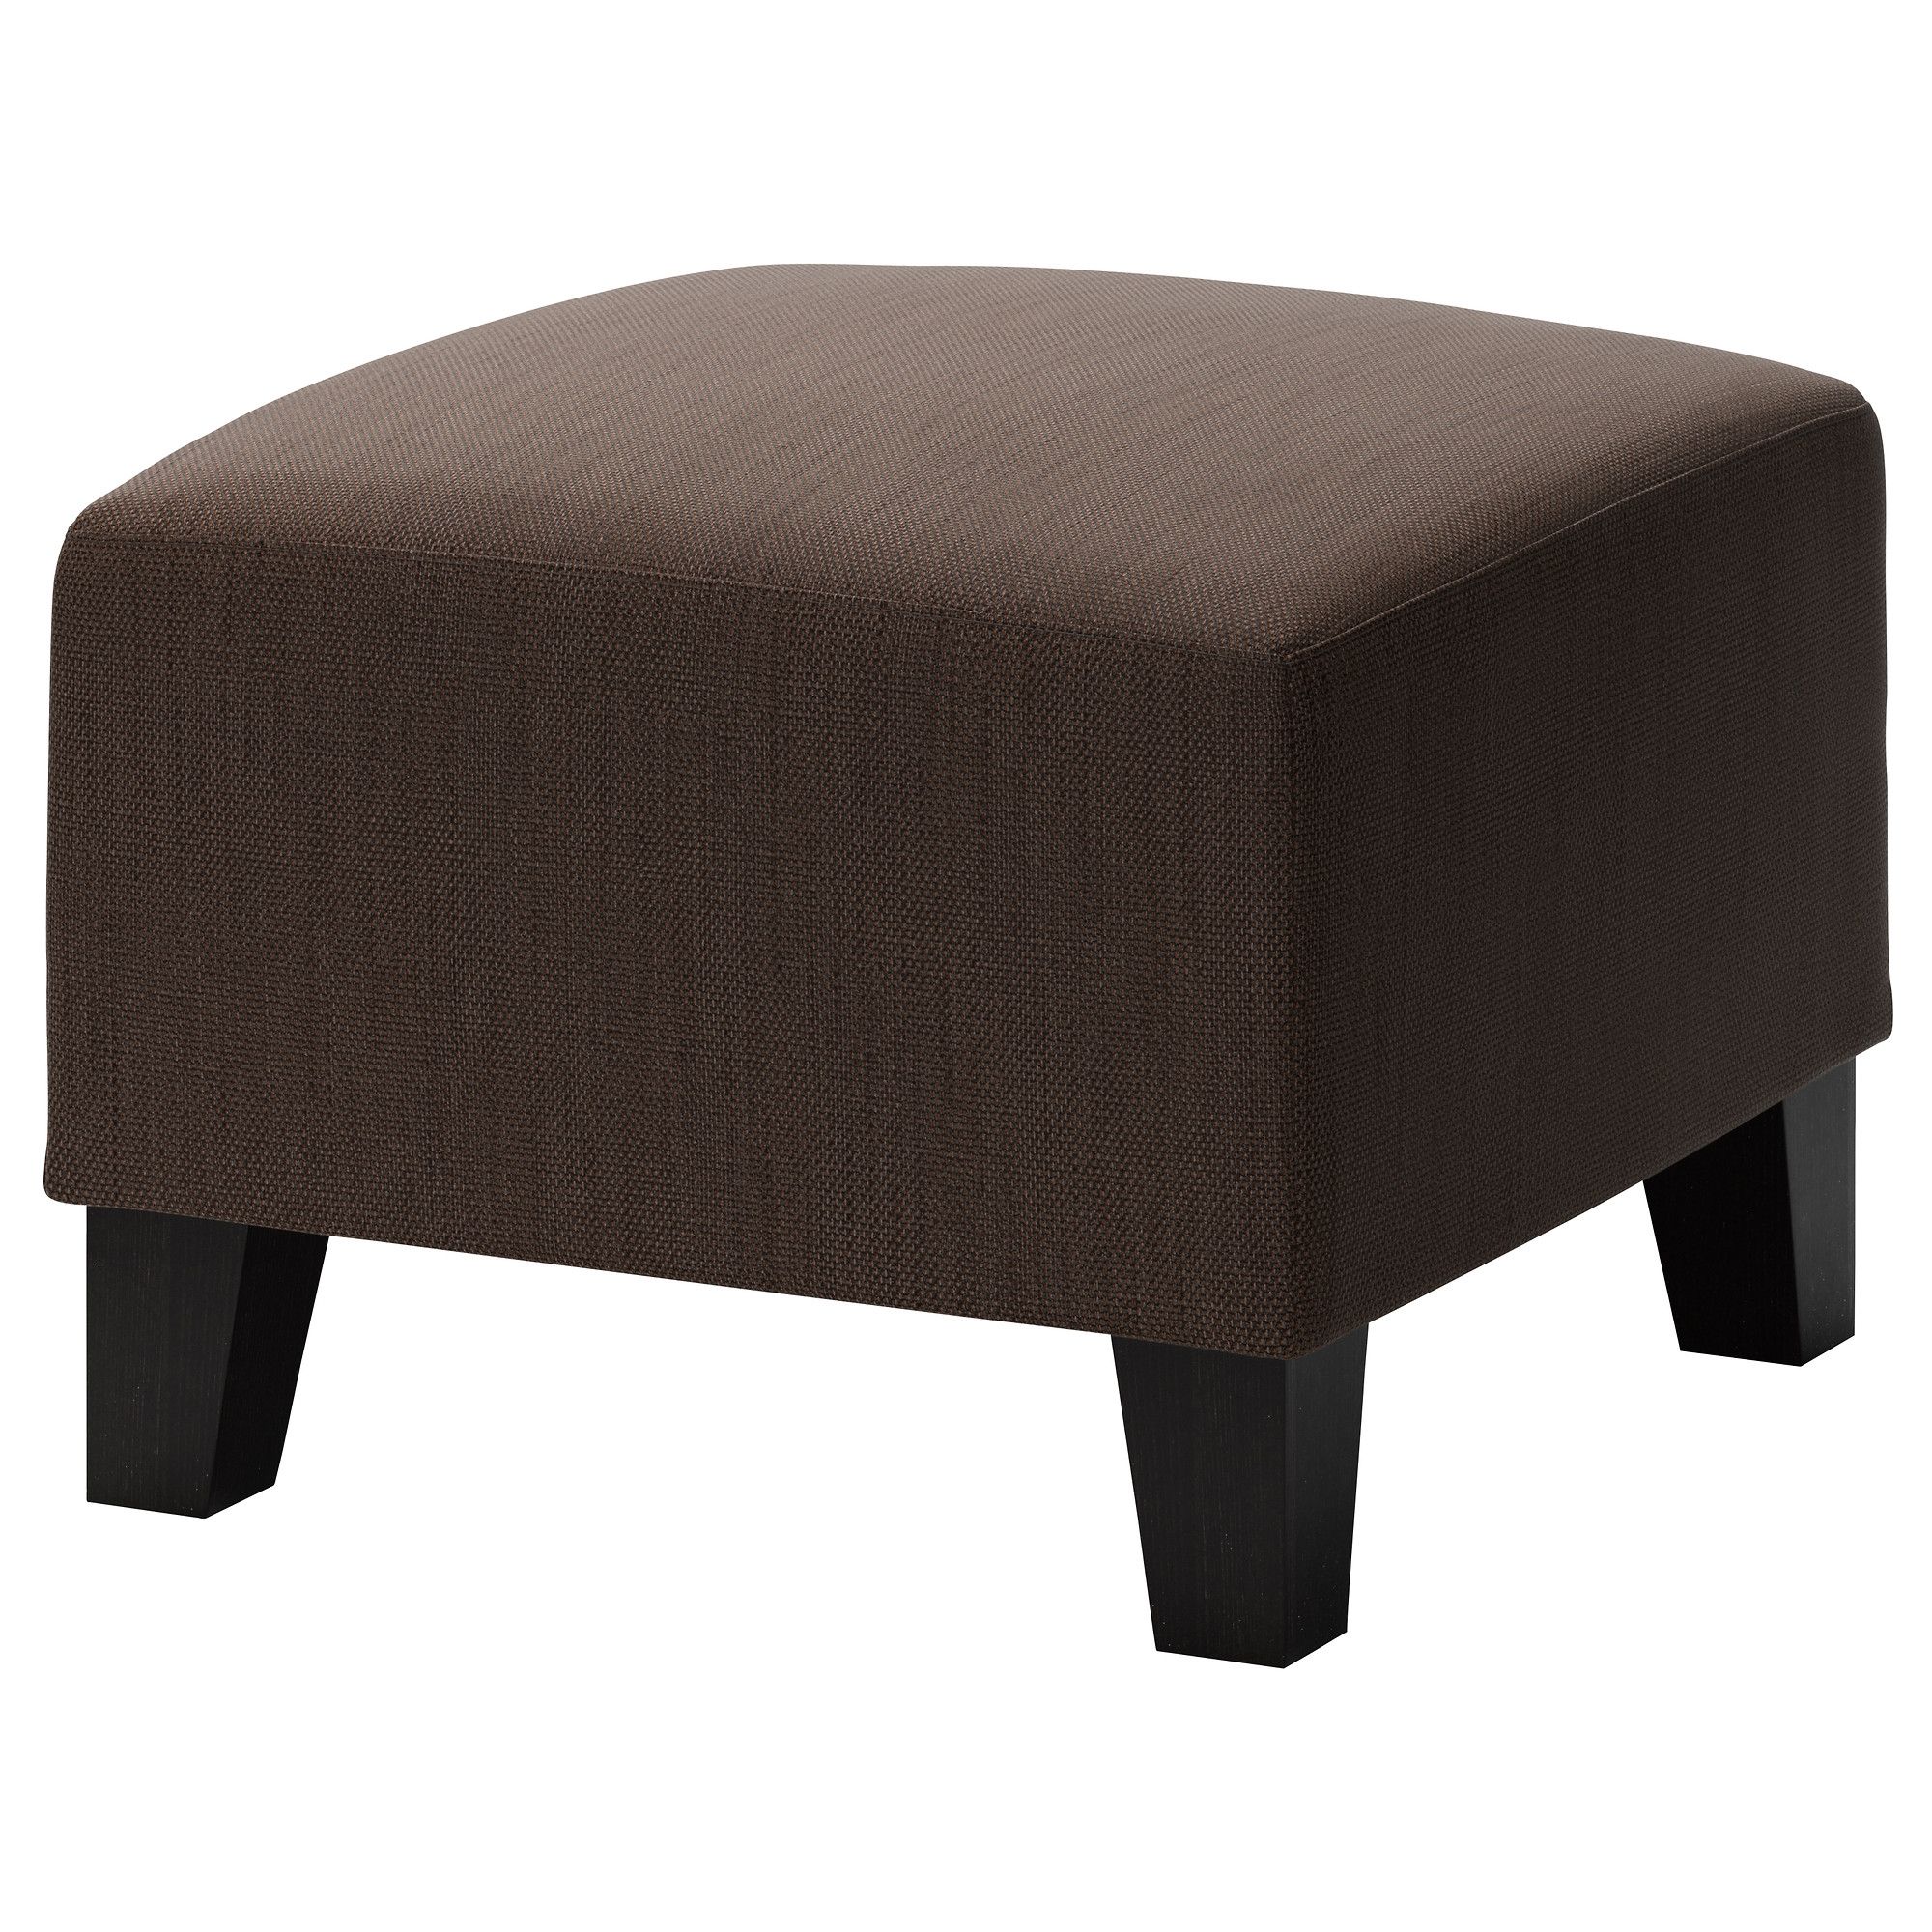 Footstools Ottomans Pouffes Ikea Within Upholstered Footstools (View 13 of 15)